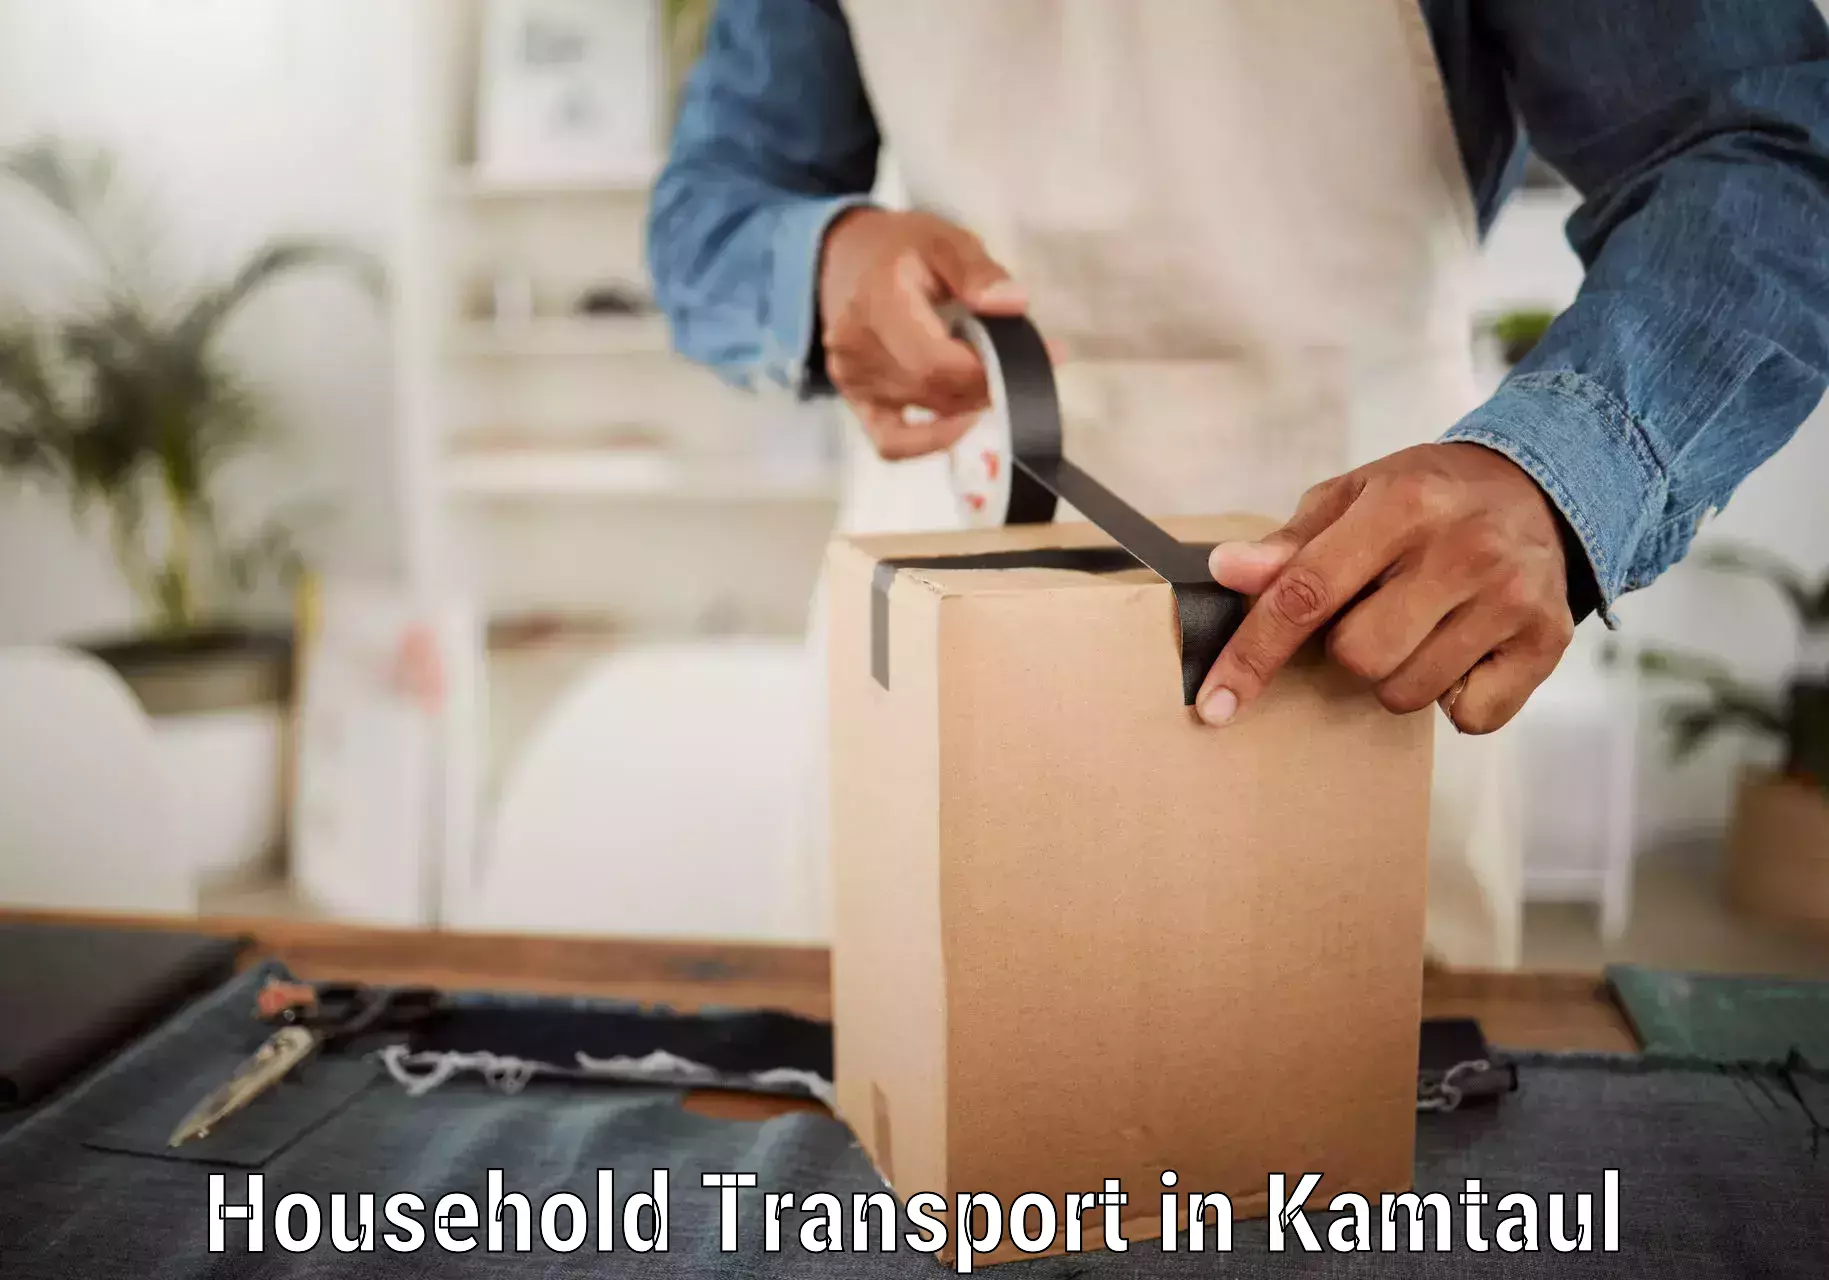 Furniture transport specialists in Kamtaul